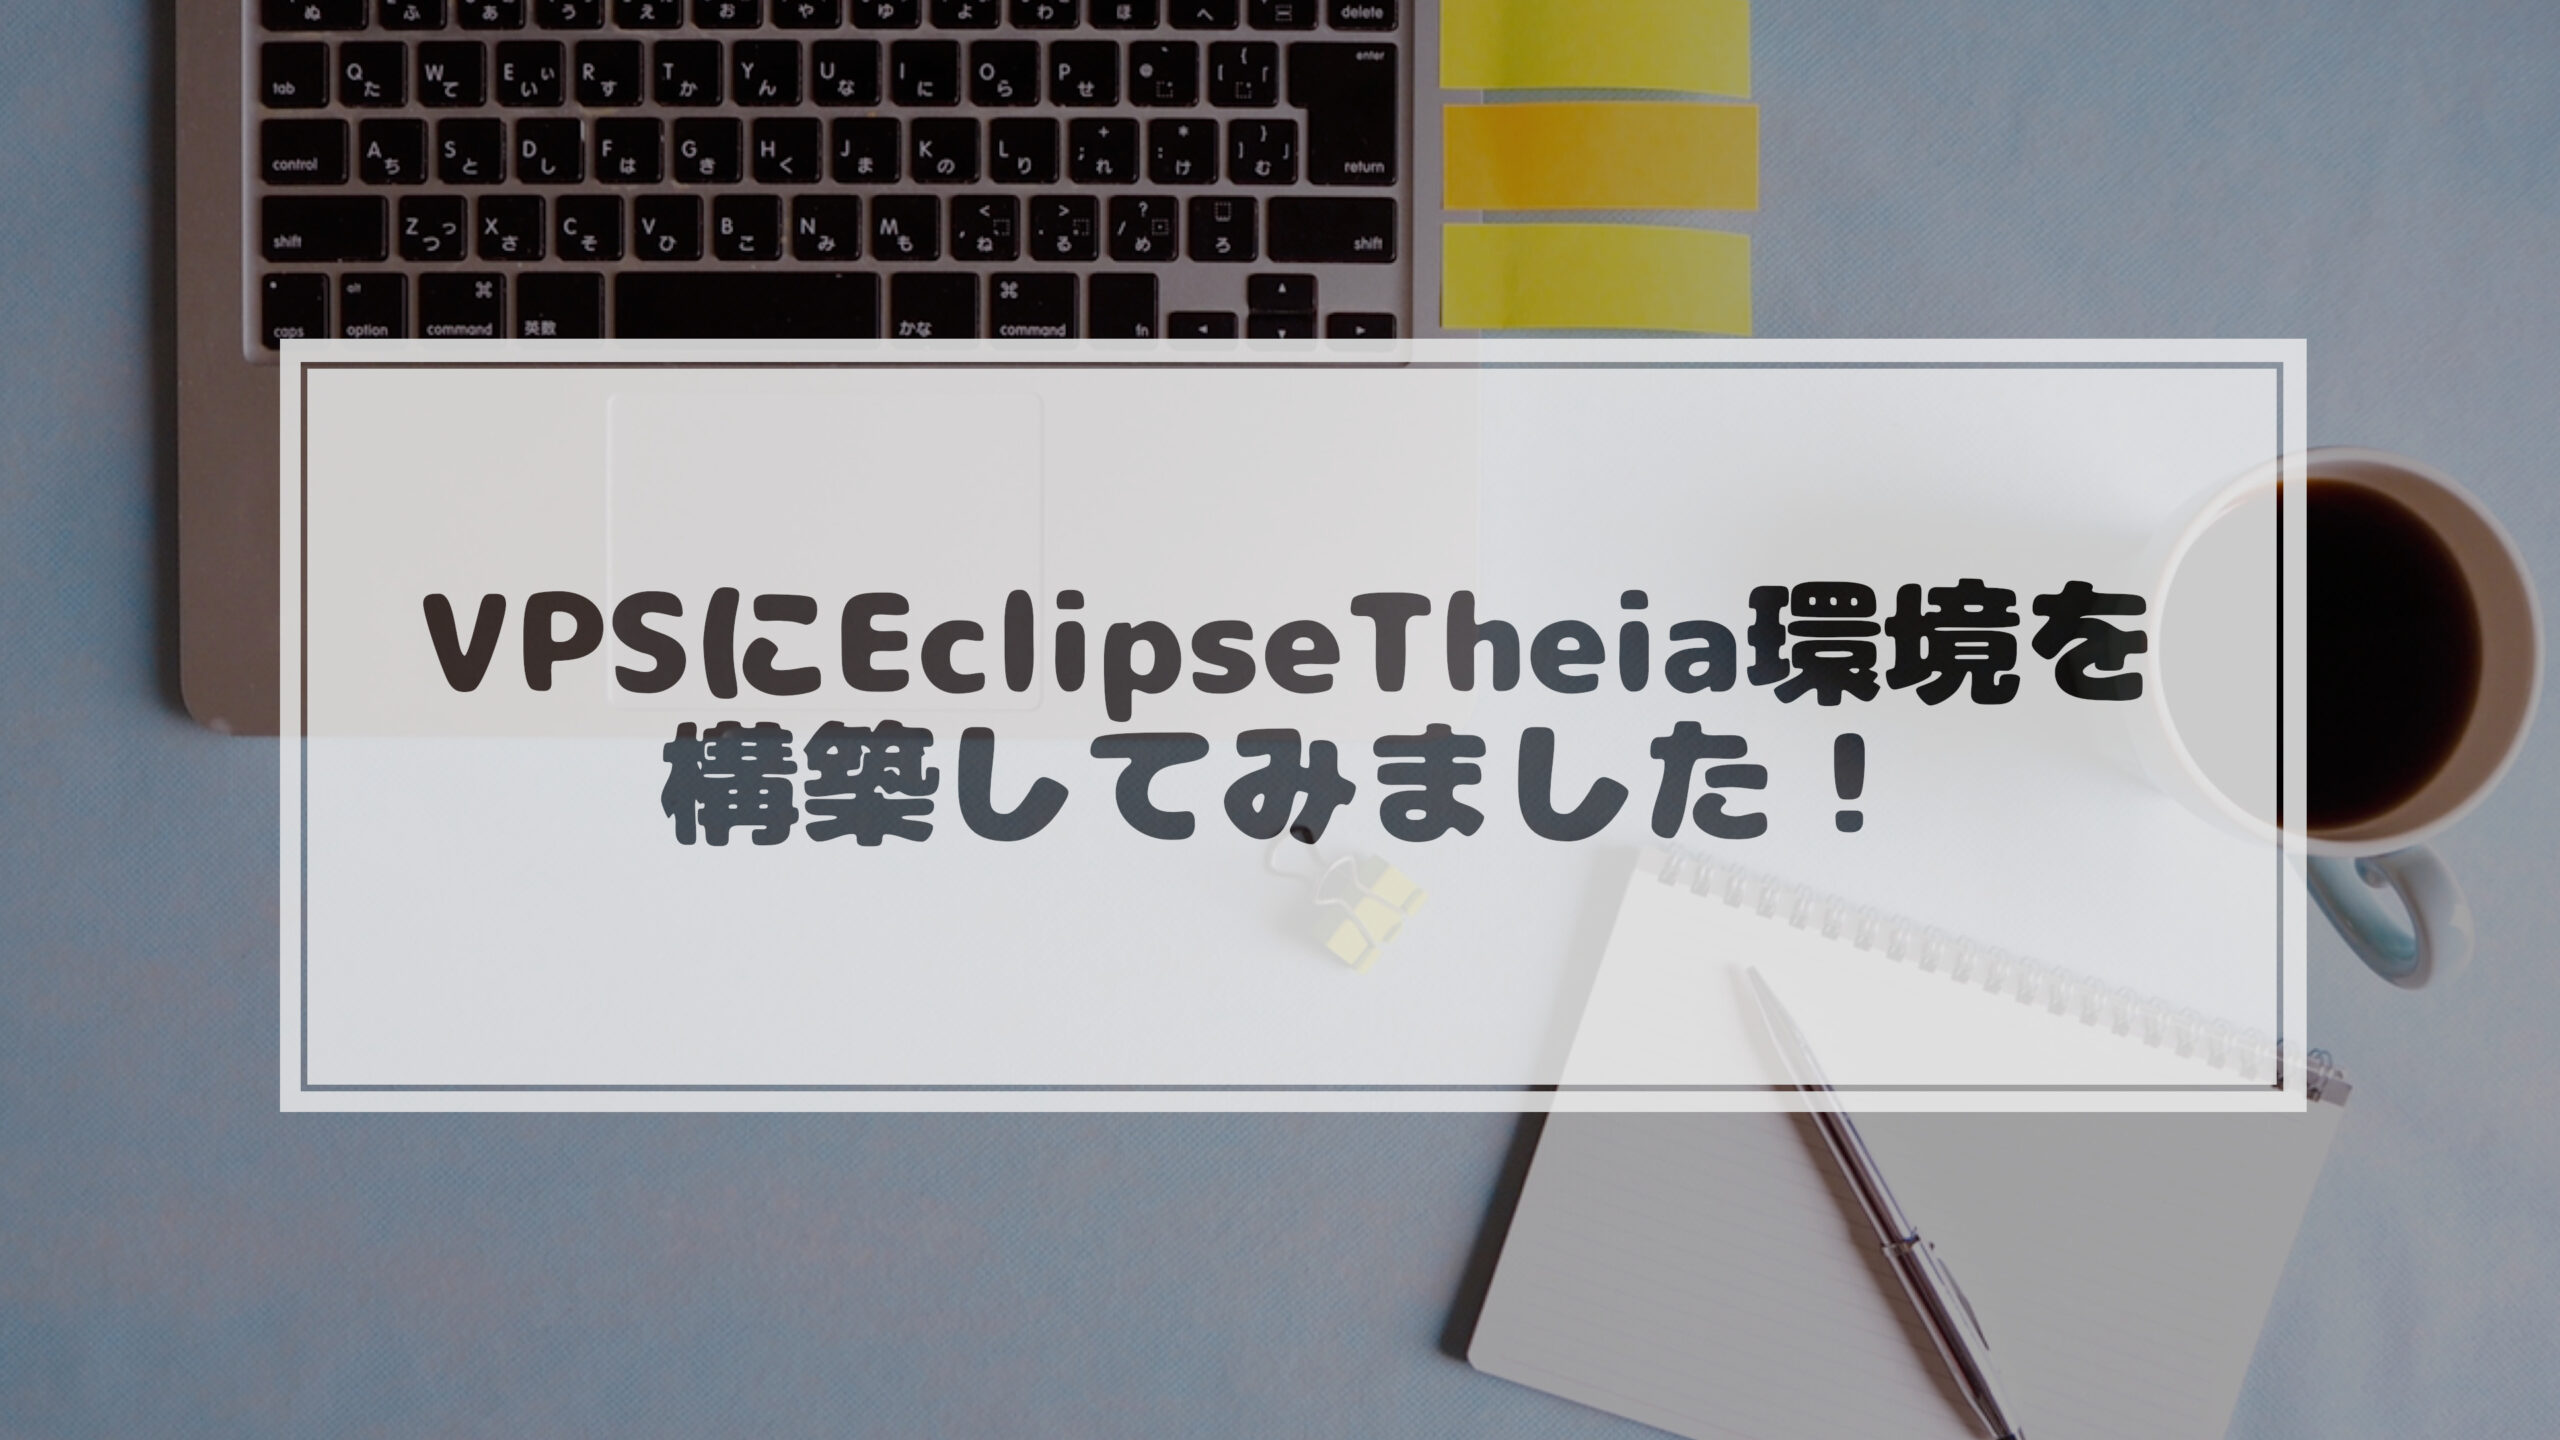 You are currently viewing ChromeBookで作業したいのでVPSにDockerで「Eclipse Theia」環境を構築してみました